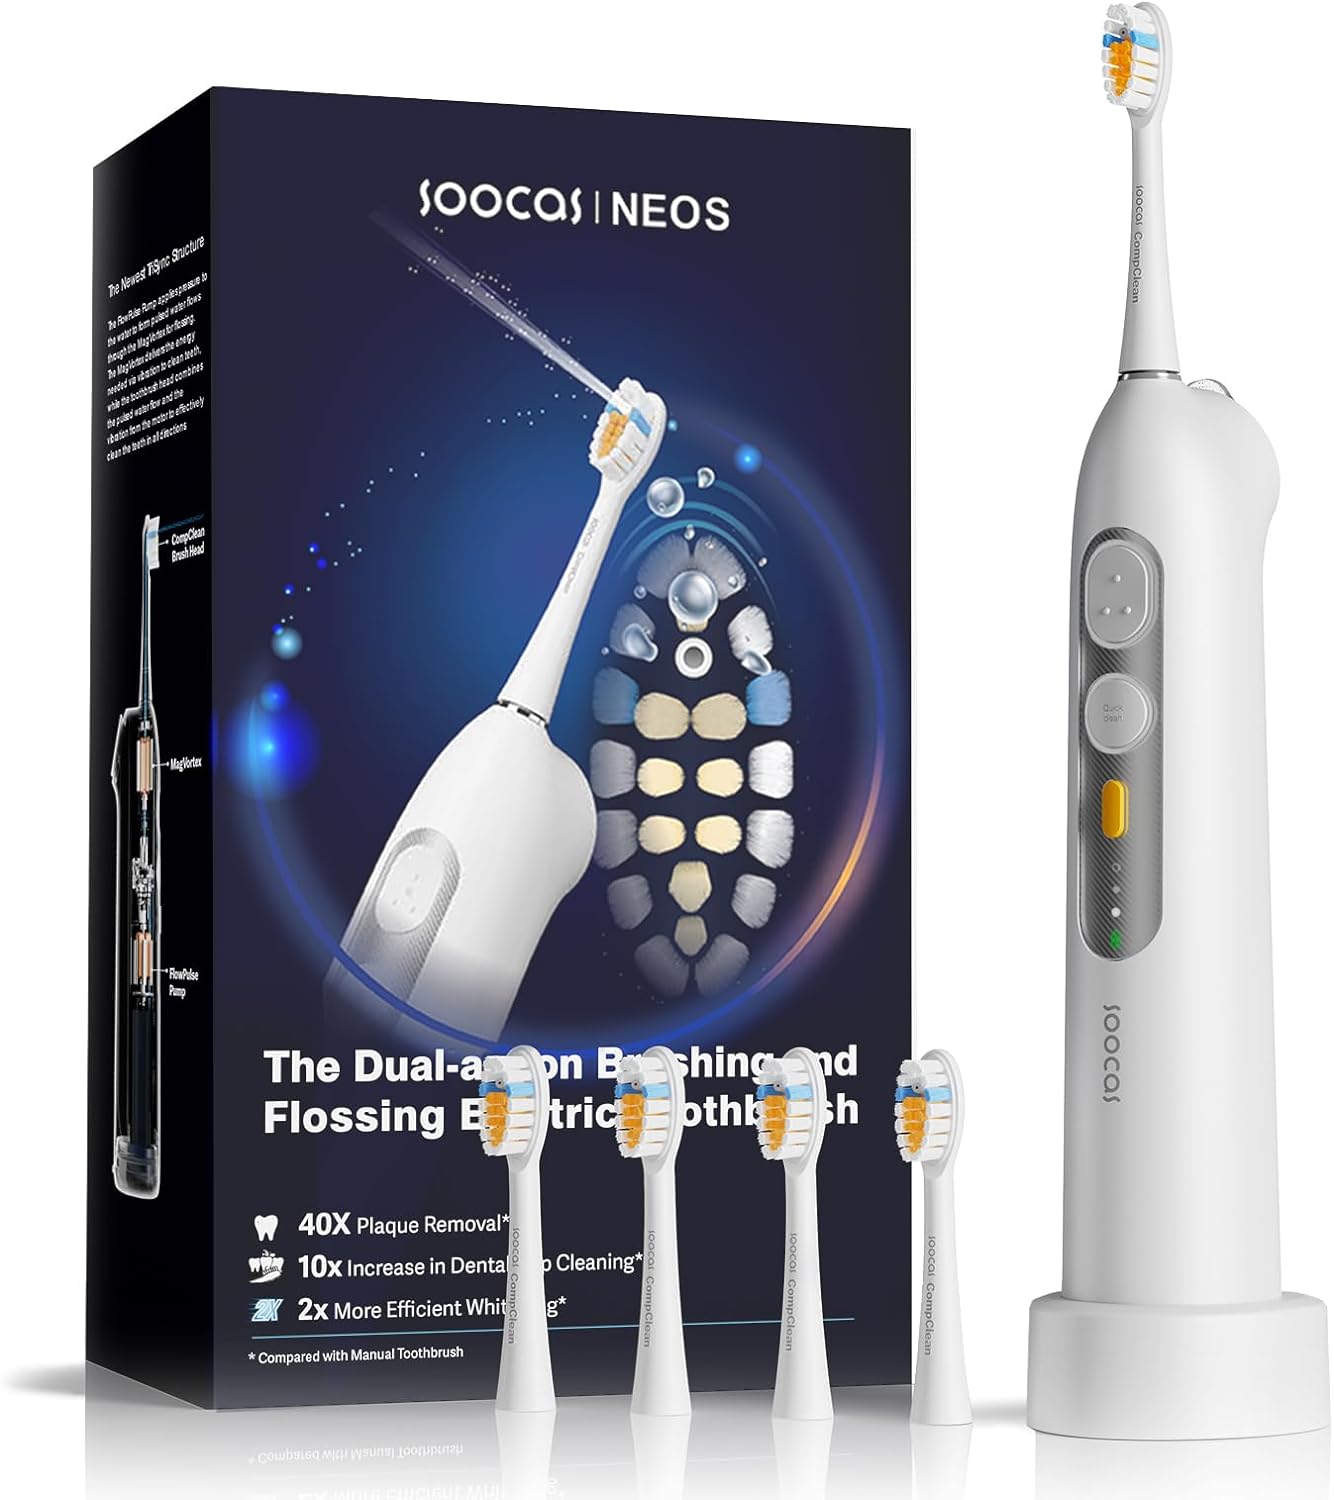 SOOCAS Neos | Electric Toothbrush with Water Flosser Cordless, 2-in-1 Brushing & Flossing Combo Electric Toothbrush for Adults, Built-in Water Tank, 40X Cleaning Effect 6 Settings